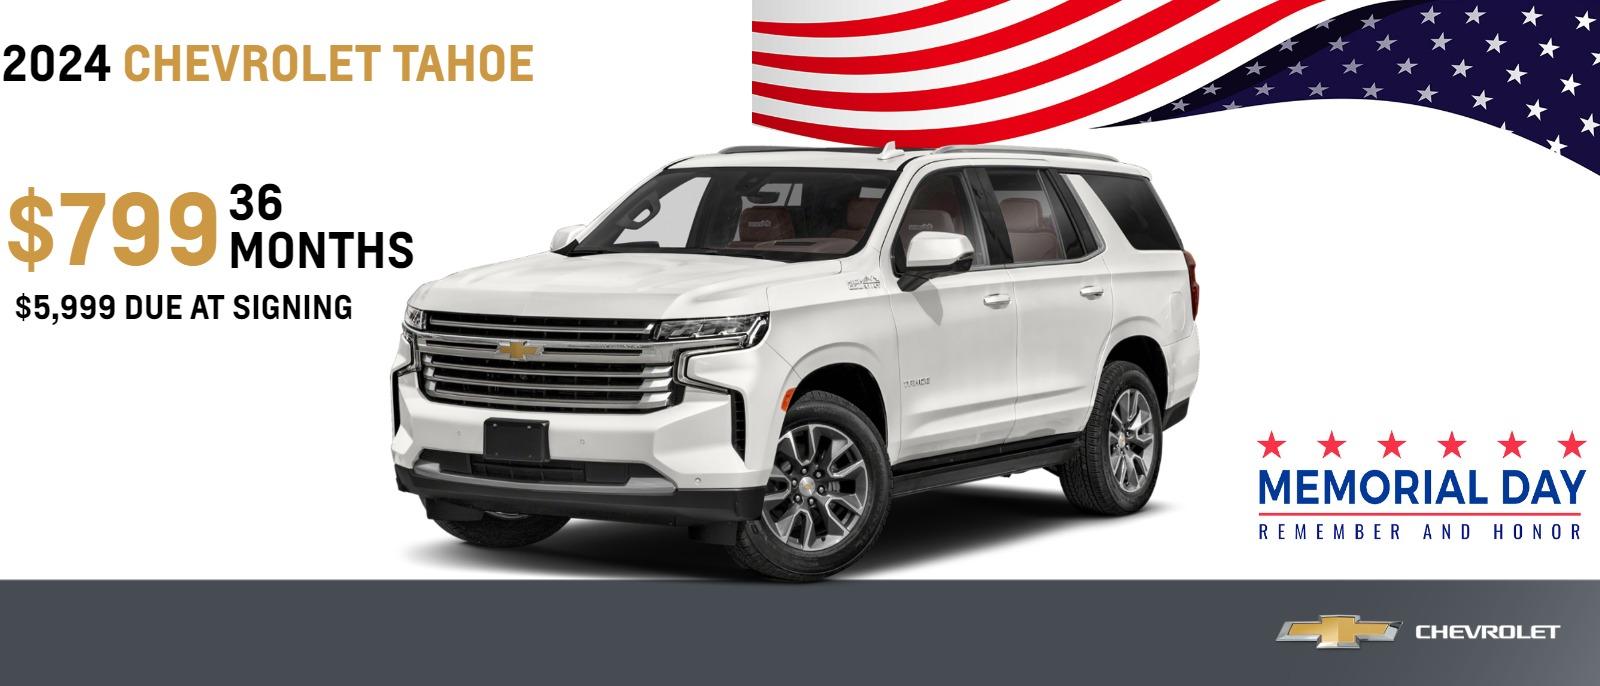 2024 CHEVROLET TAHOE 
$799 | 36 months | $5,999 due at signing